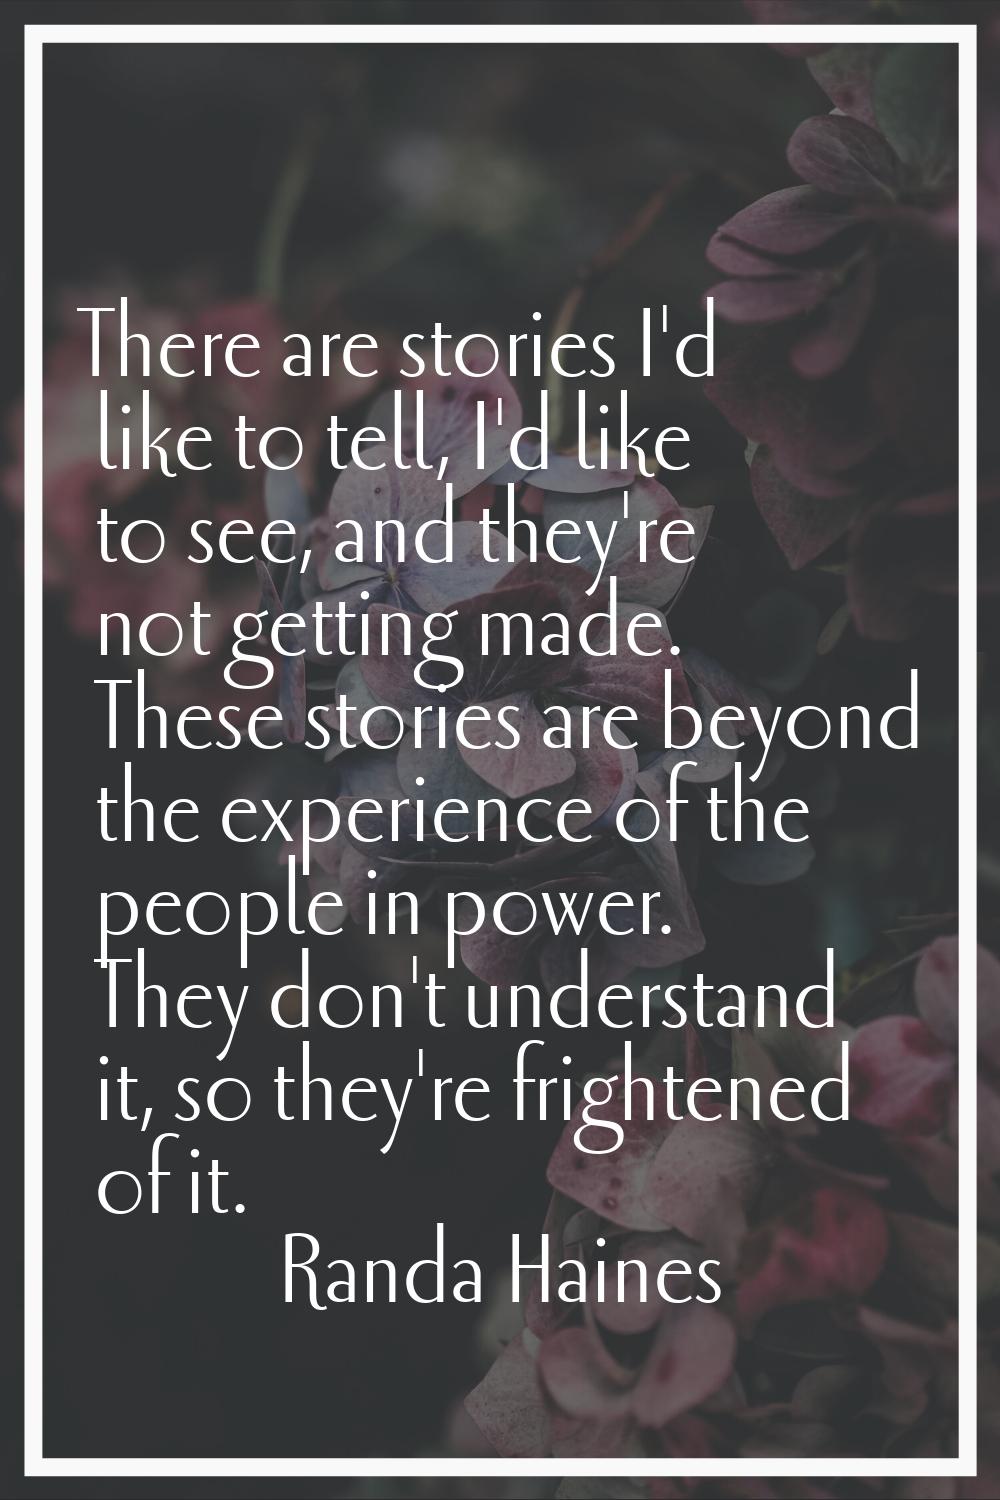 There are stories I'd like to tell, I'd like to see, and they're not getting made. These stories ar